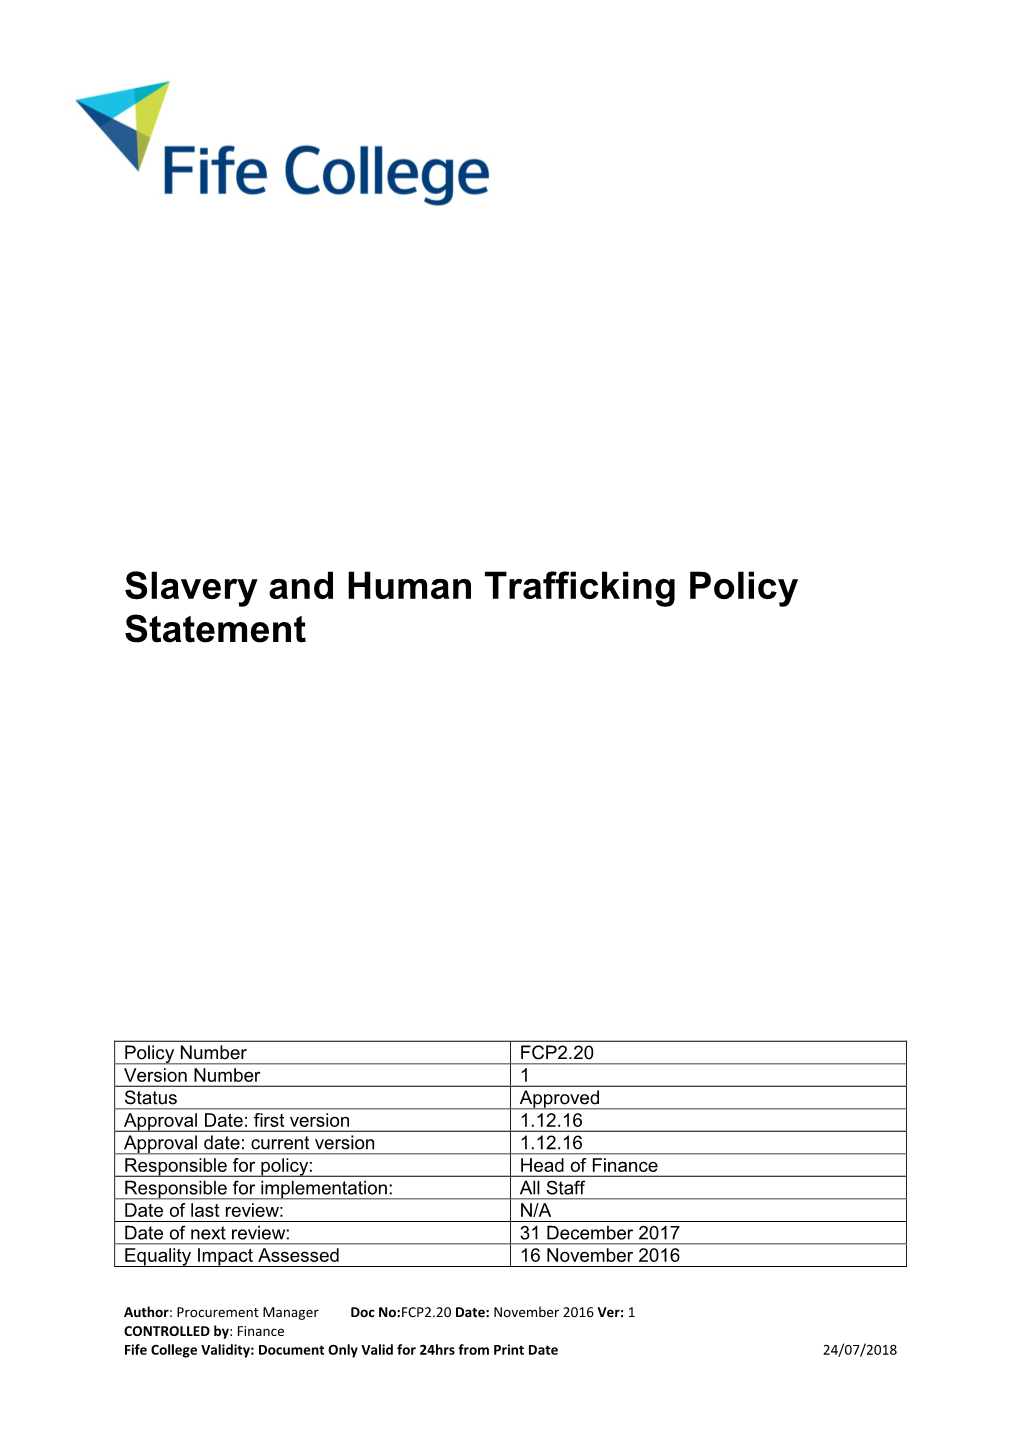 Slavery and Human Trafficking Policy Statement